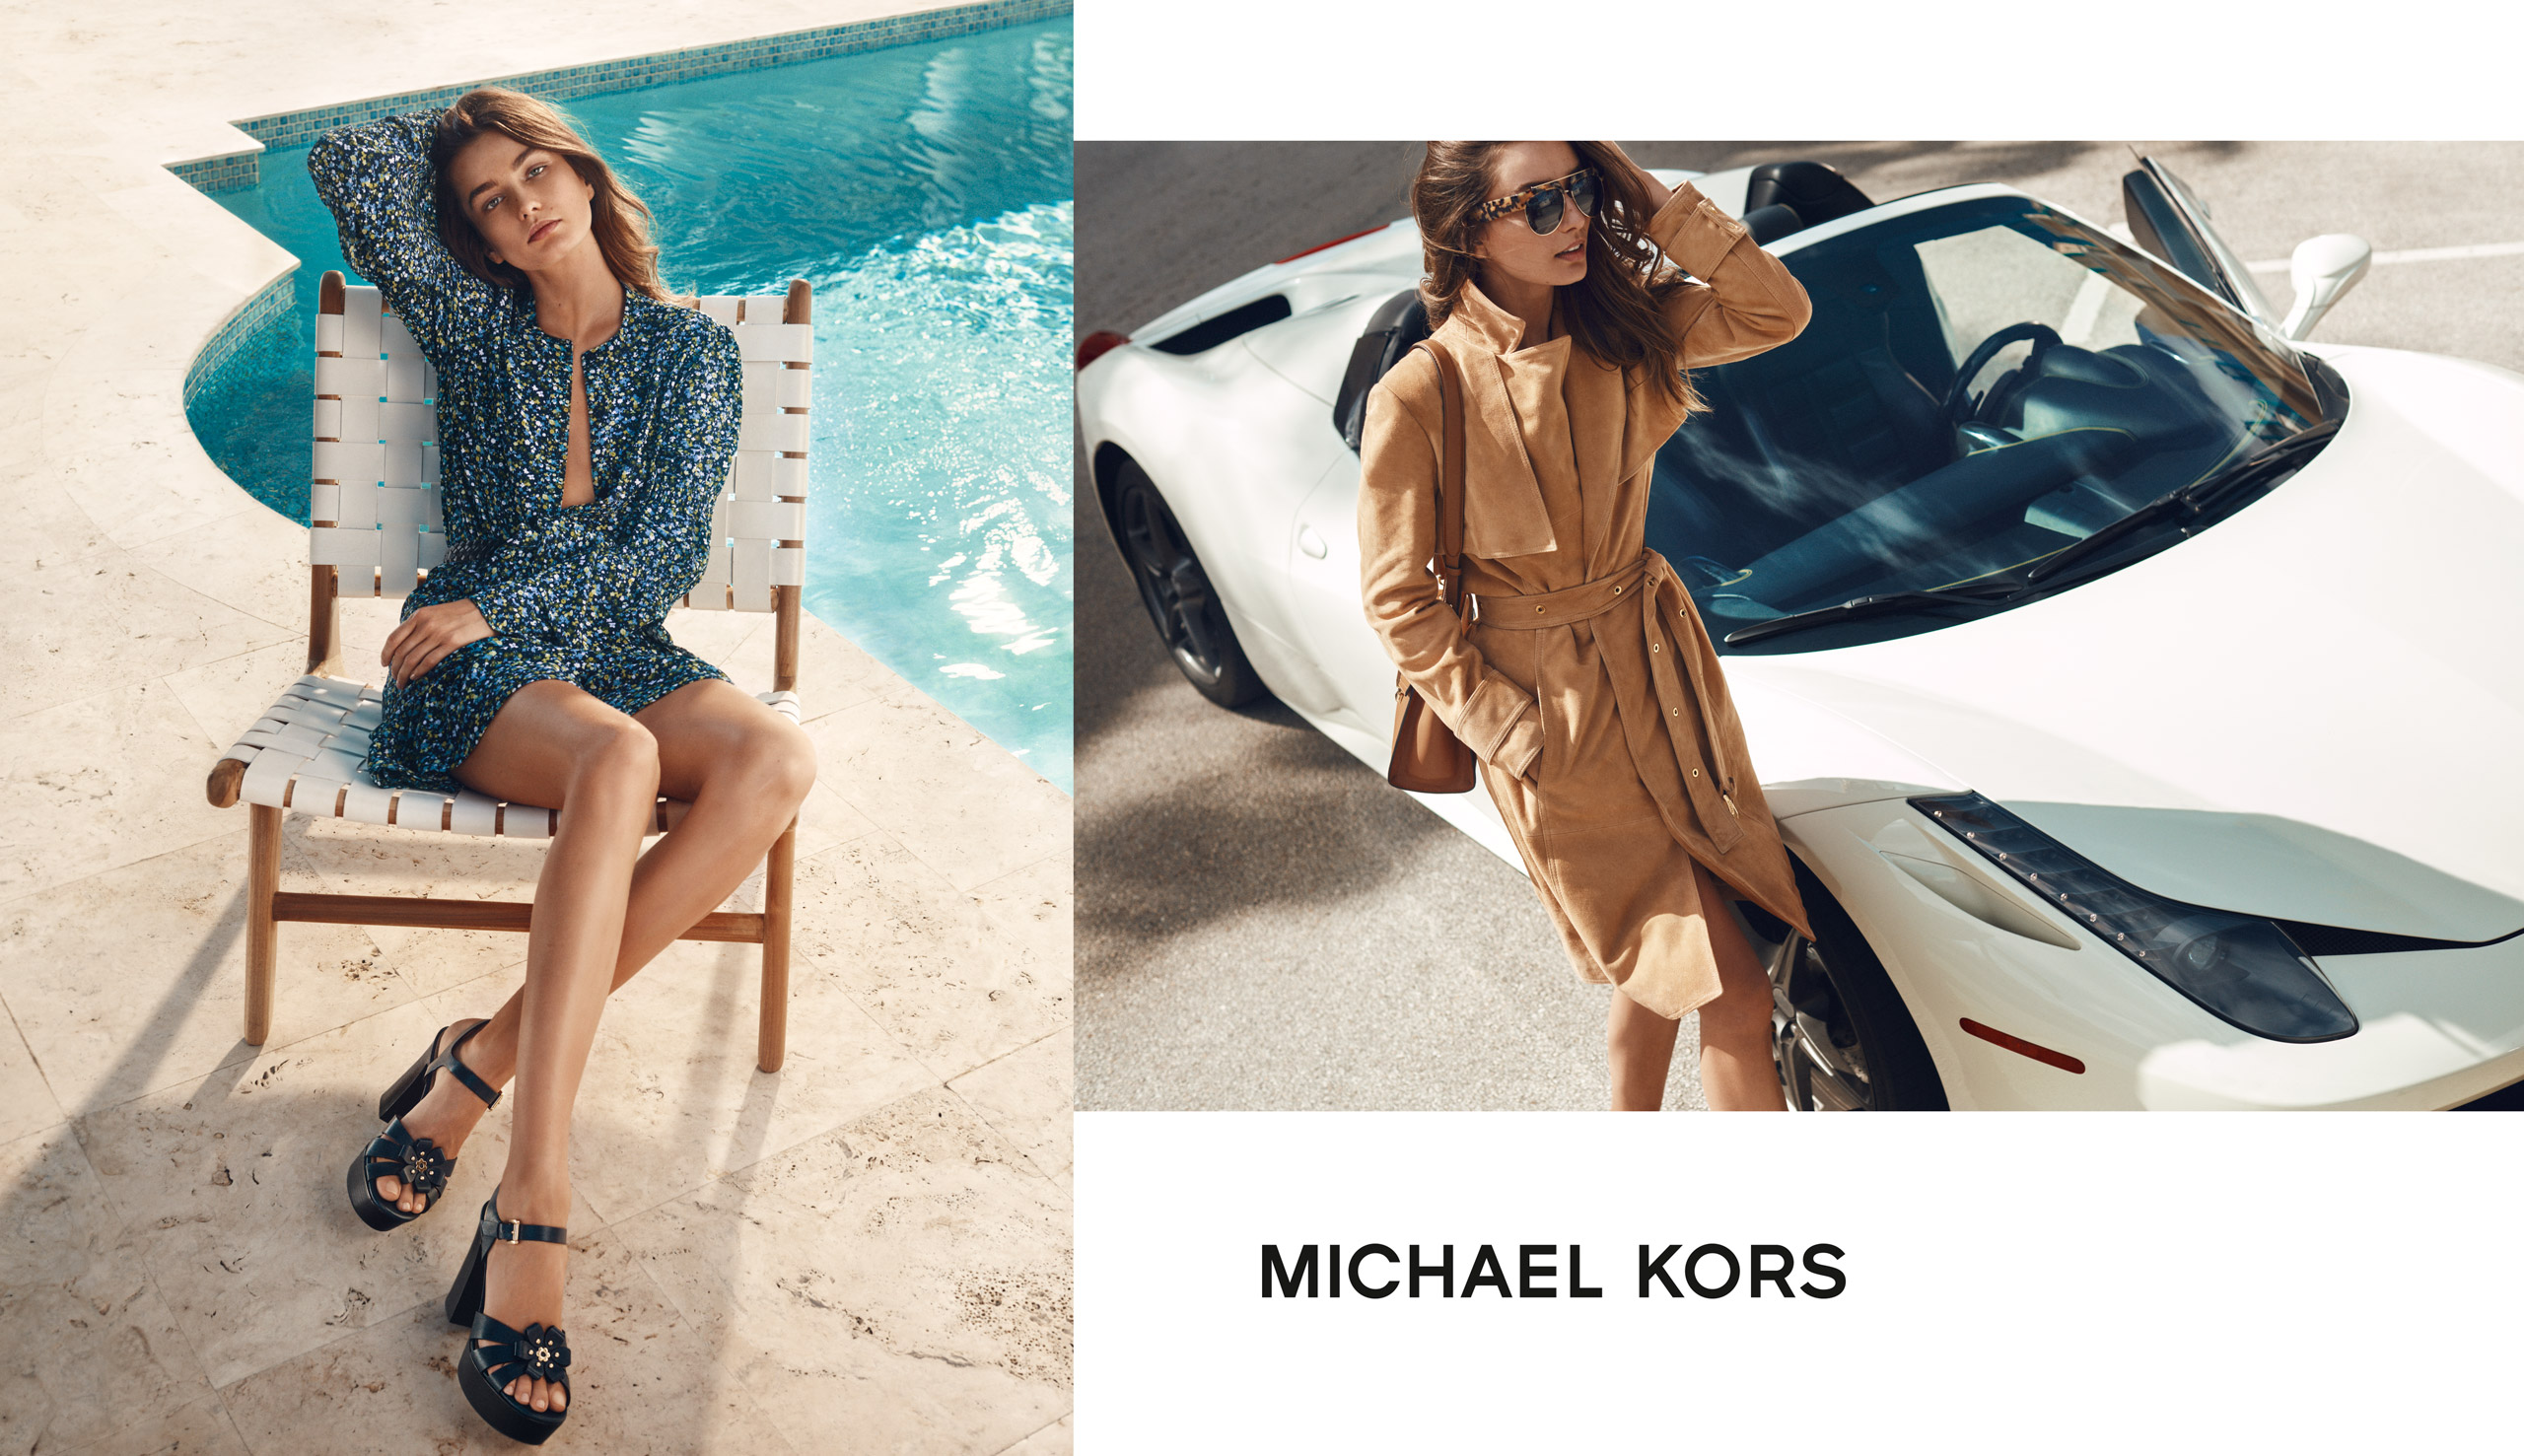 <p><span style="font-size: 12px;">photographer</span> <span style="font-weight: bold;">Emma Tempest</span></p><p><span style="font-weight: bold;">Michael Kors</span></p><div><span style="font-weight: bold;"><br></span></div>